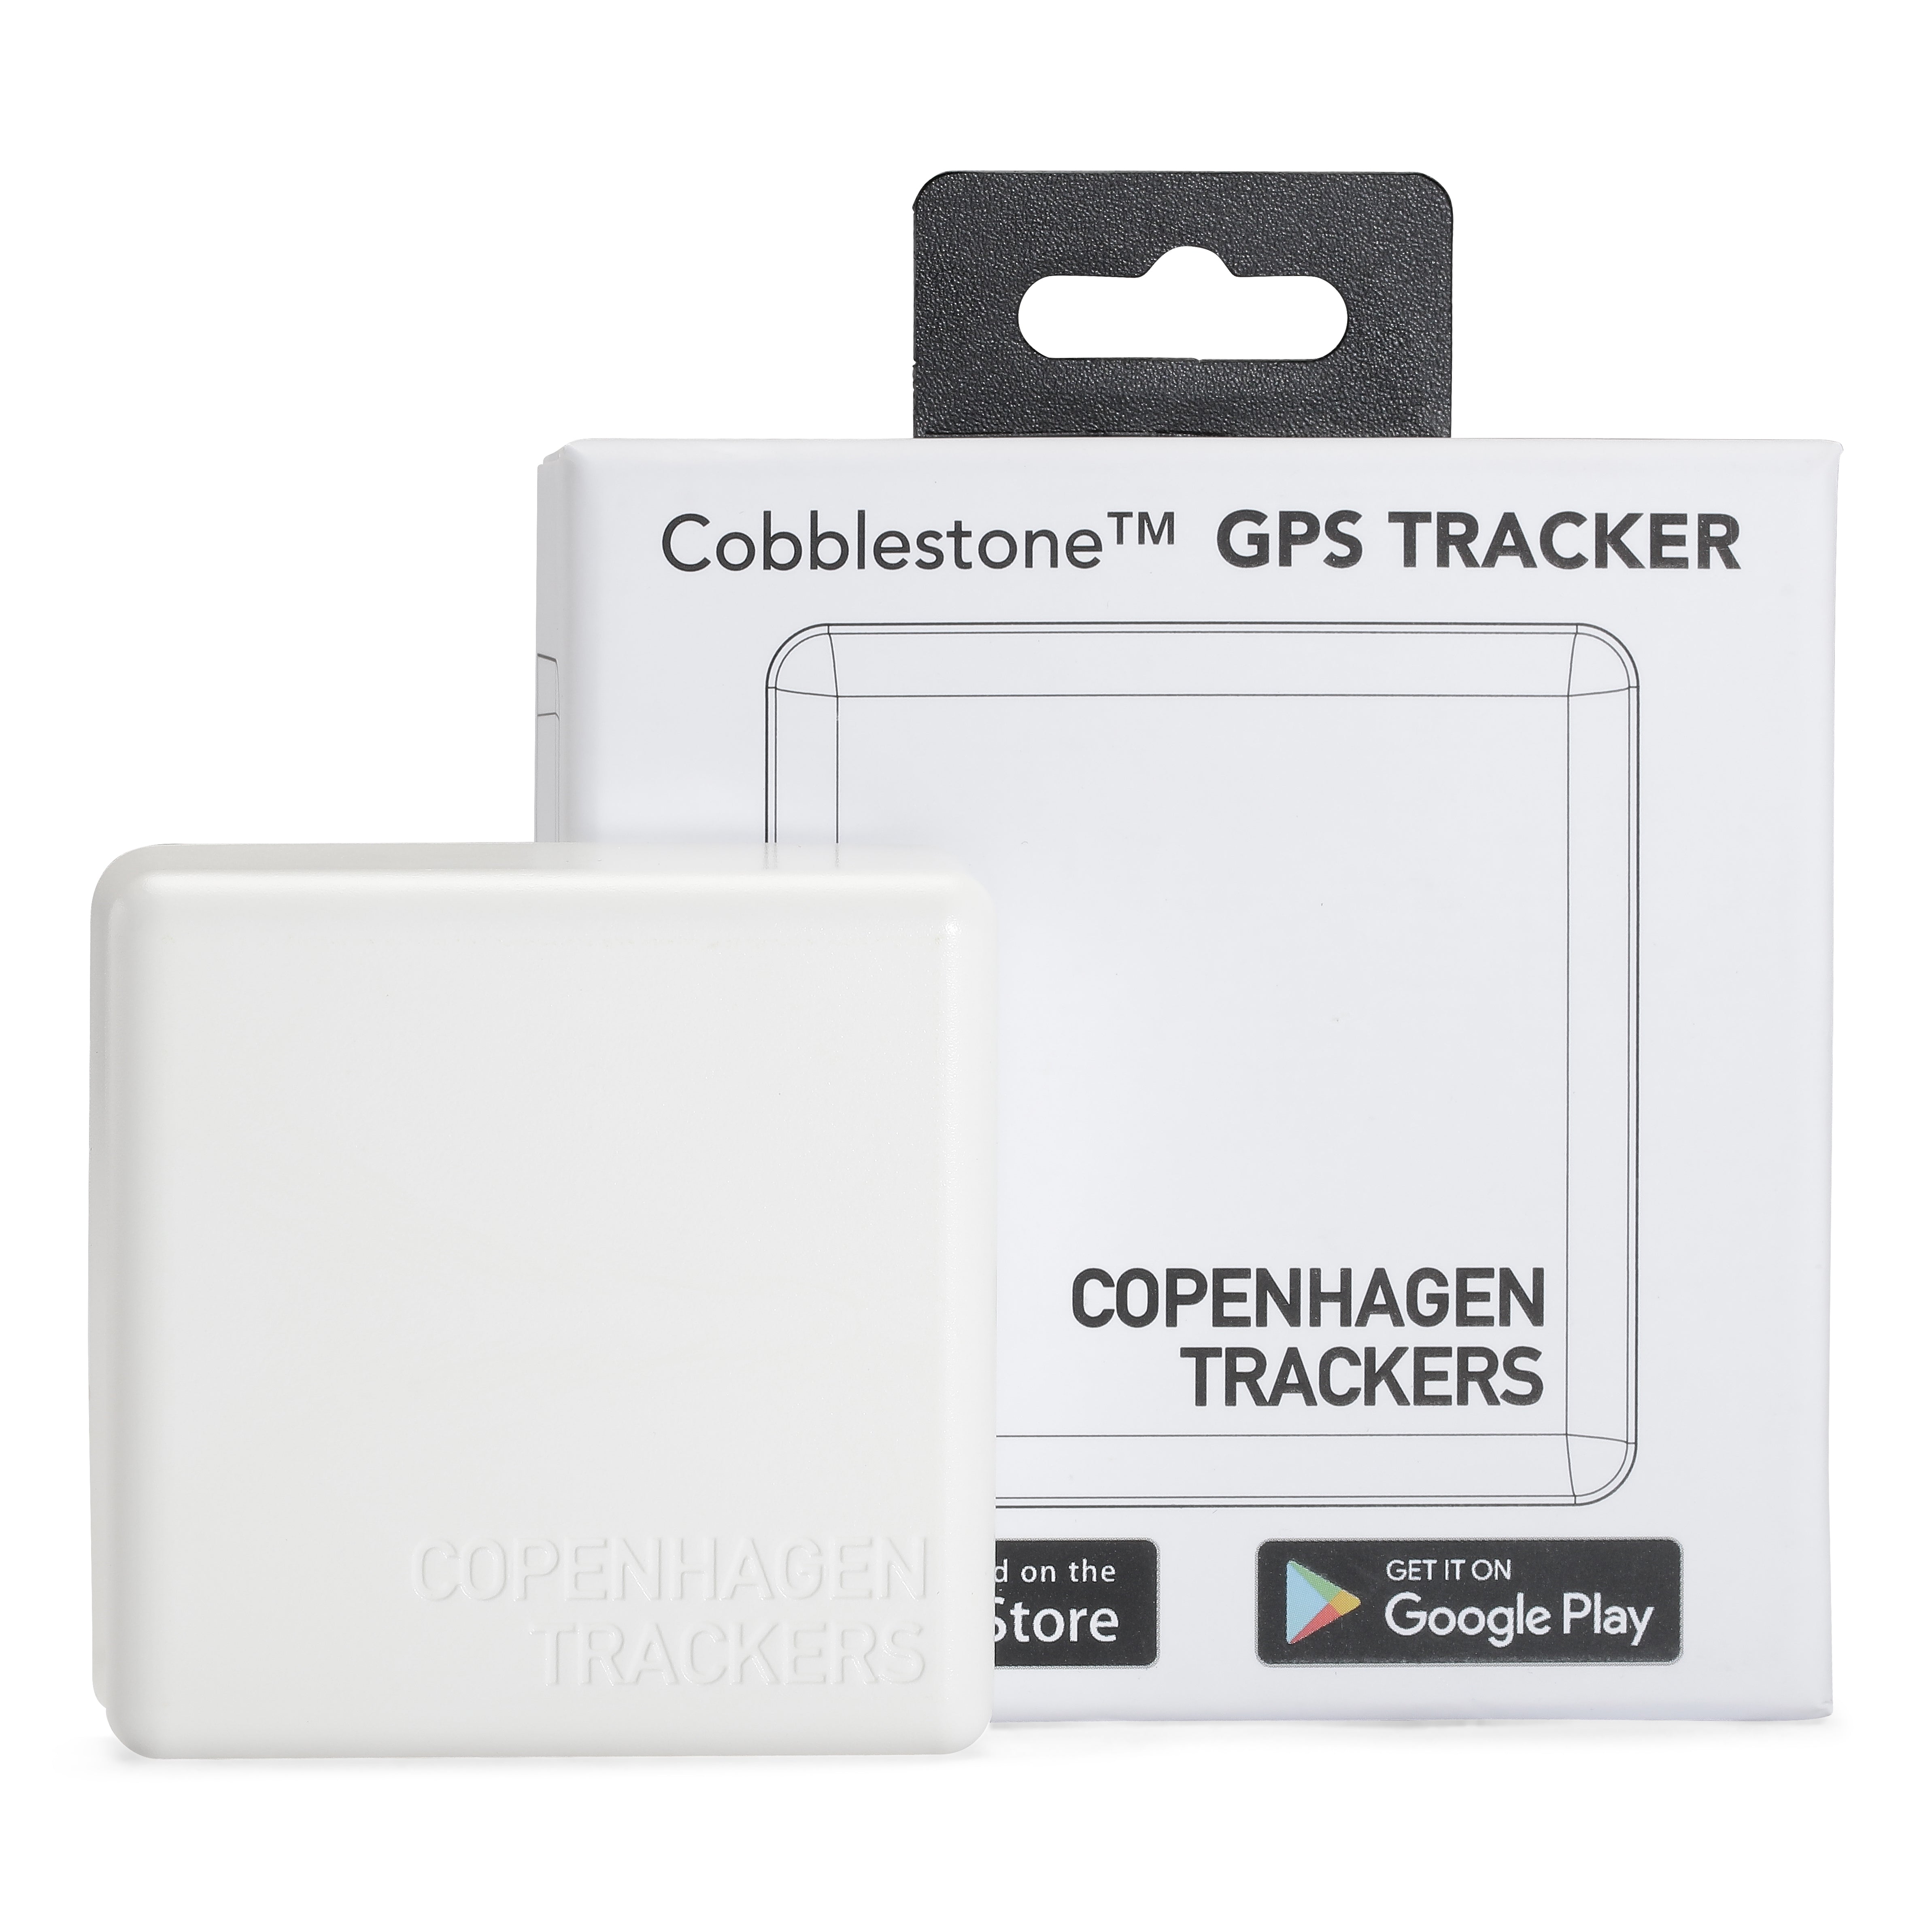 GPS Bike Tracker with no need for expensive mobile data plan - 9to5Mac